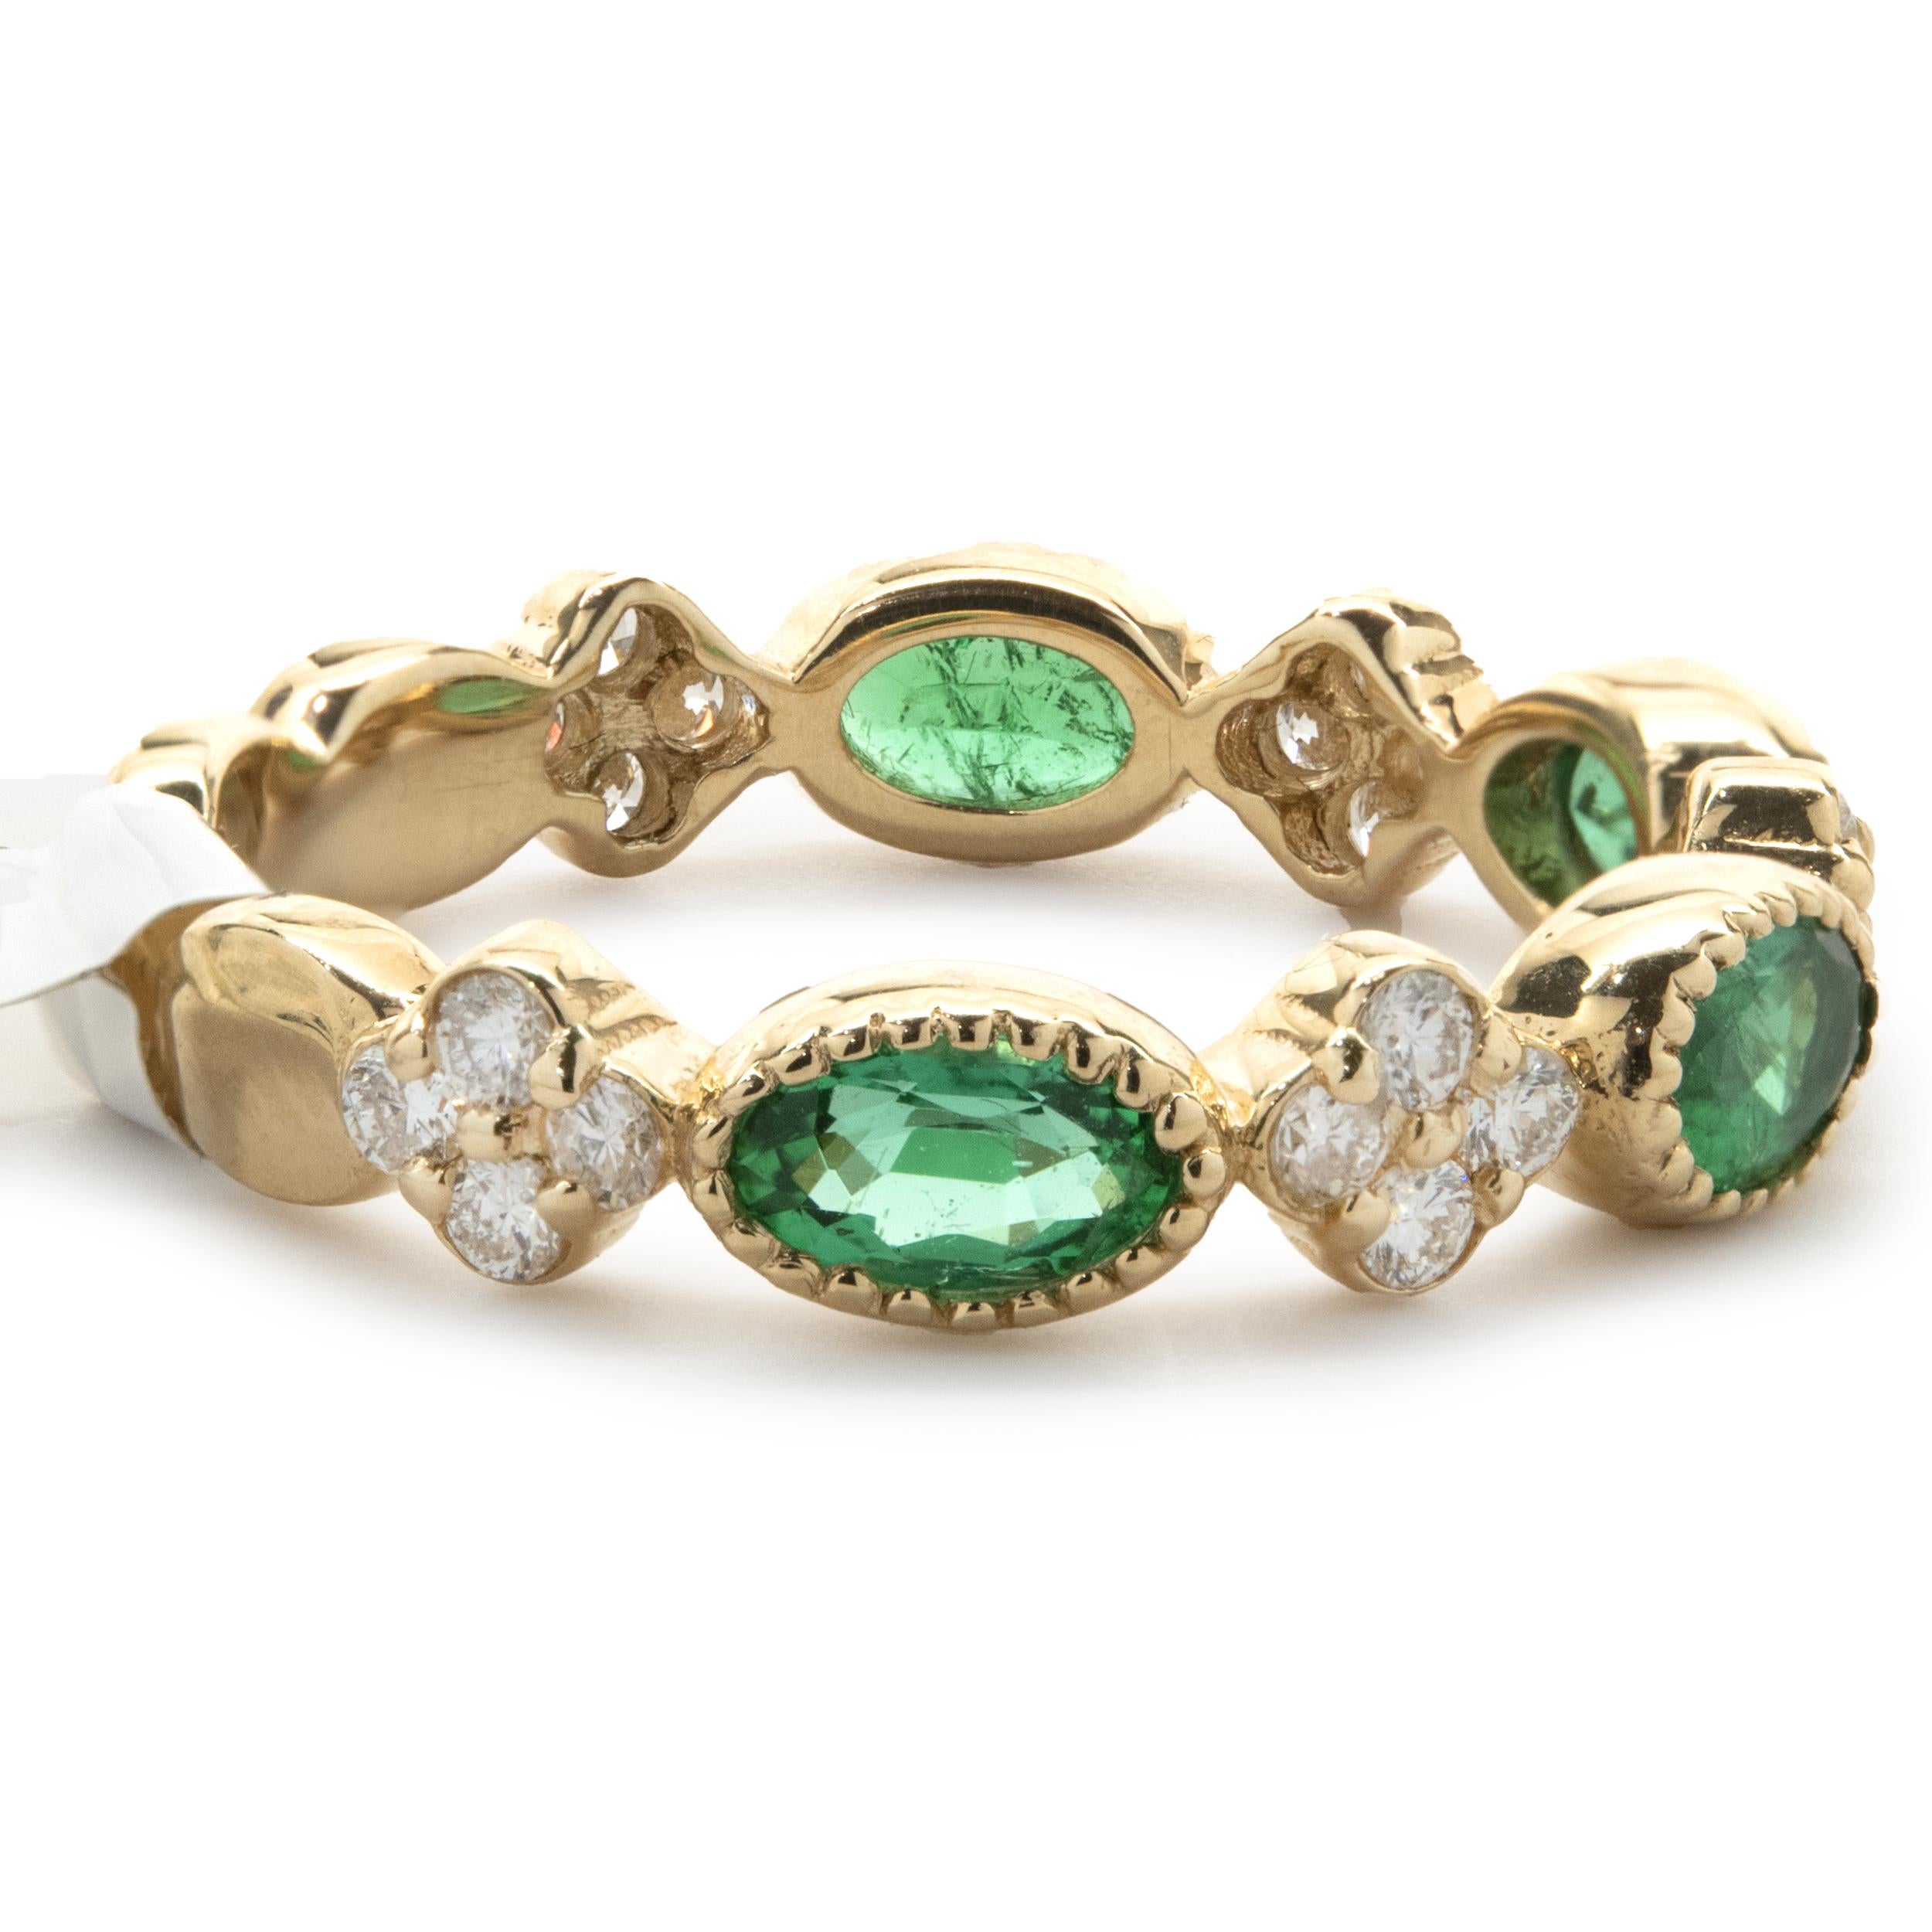 Designer: custom design
Material: 14K yellow gold
Emerald: 4 oval cut = .91cttw
Diamond: 20 round brilliant cut = .30cttw
Color: G
Clarity: SI1
Dimensions: band measures 4.10mm wide
Ring Size: 7 (complimentary sizing available)
Weight: 3.11 grams
